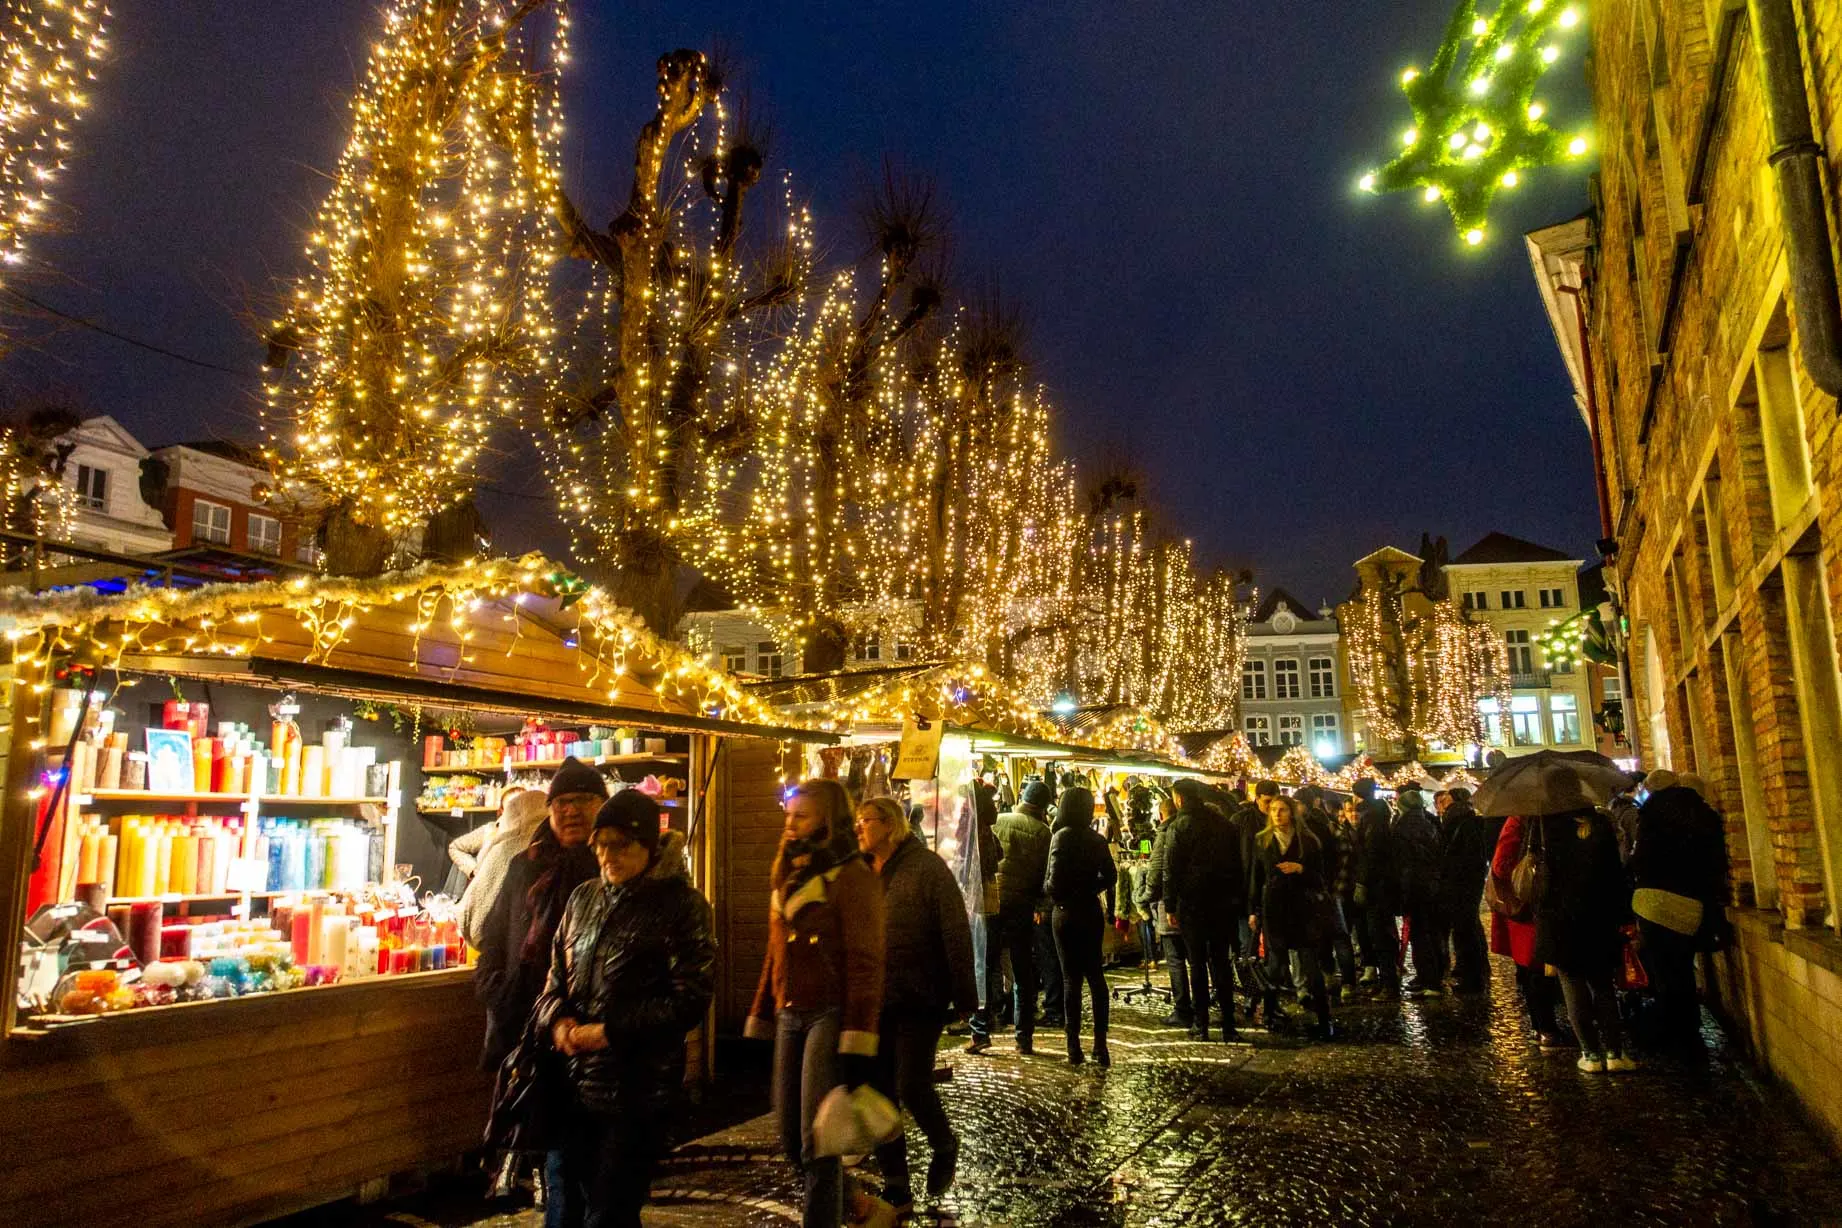 Shoppers peruse the offerings at the Christmas market at night